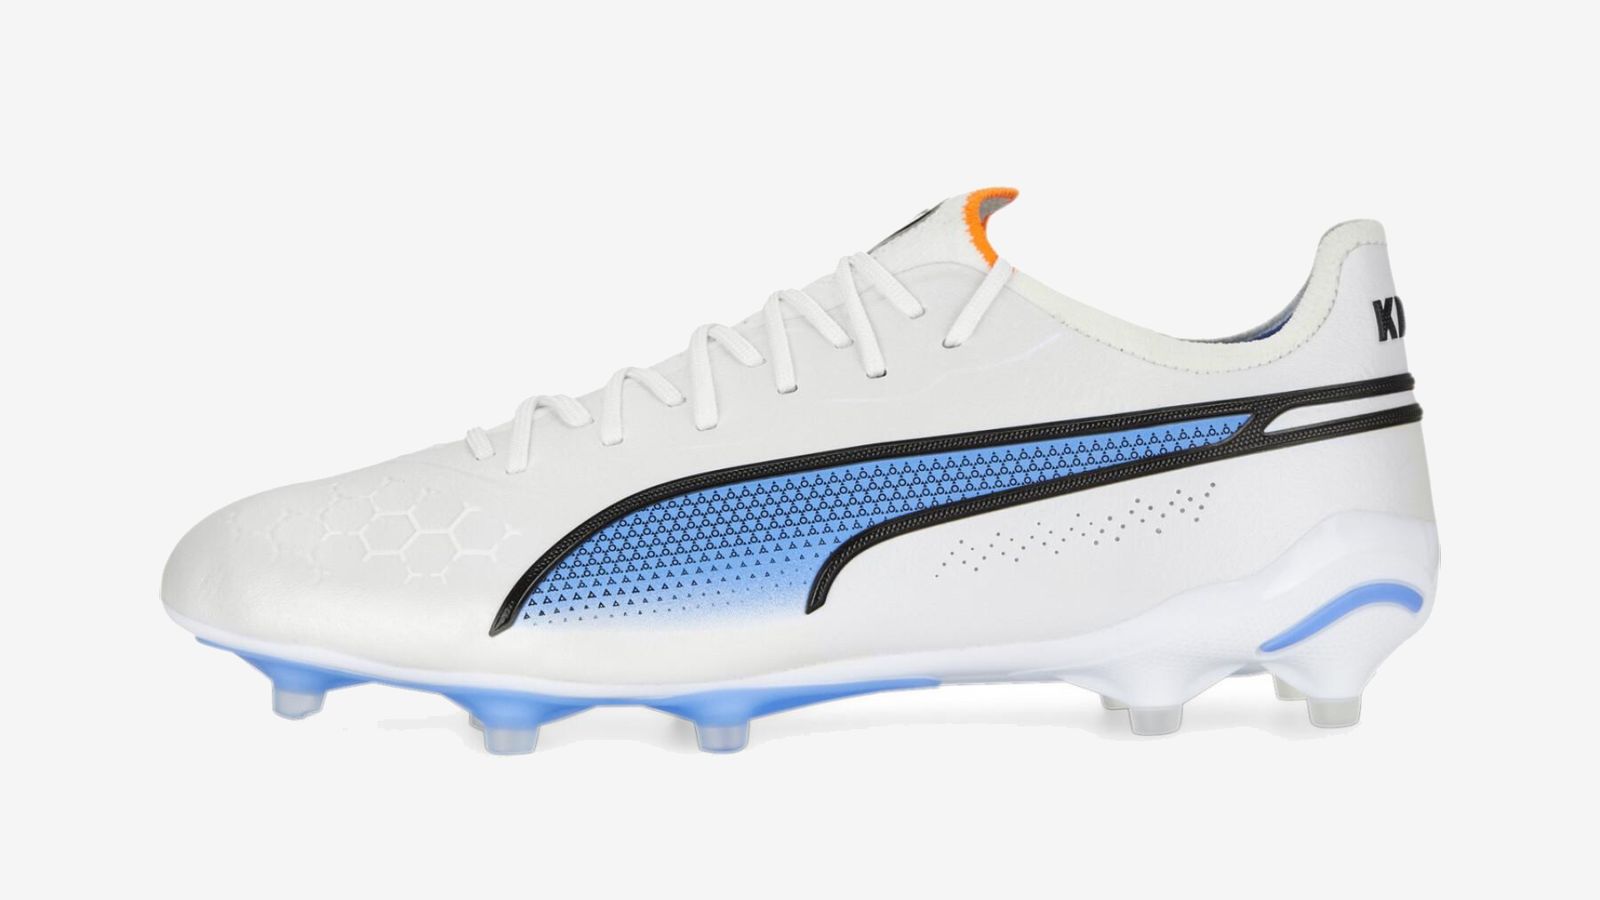 PUMA King Ultimate product image of a white boot with blue and black details and an orange tongue.